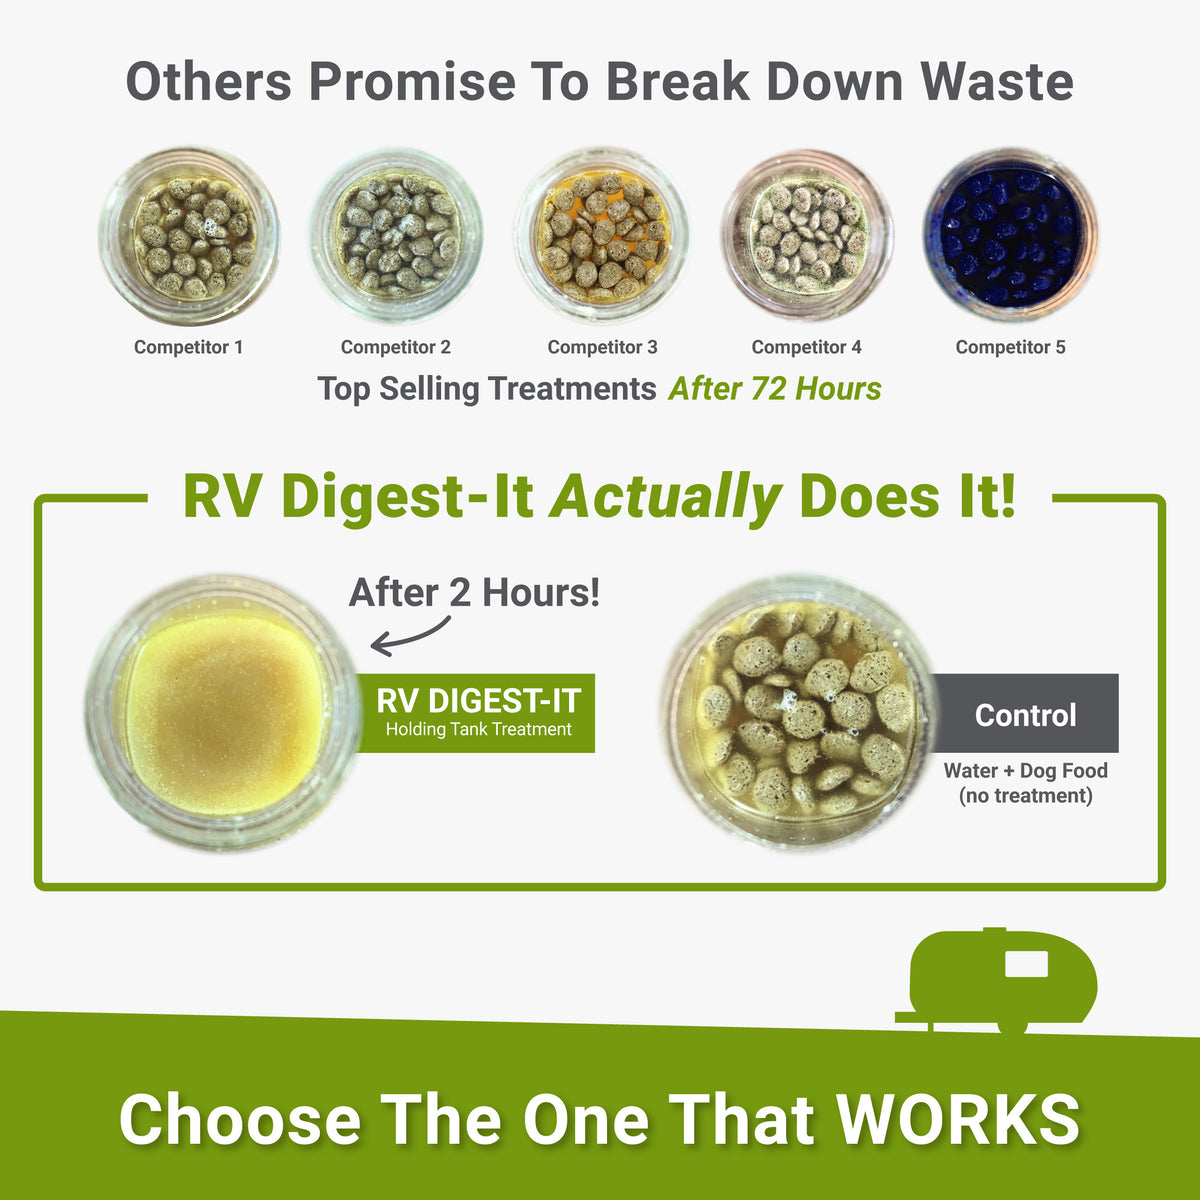 Choose a product that actually works. RV Digest-It.